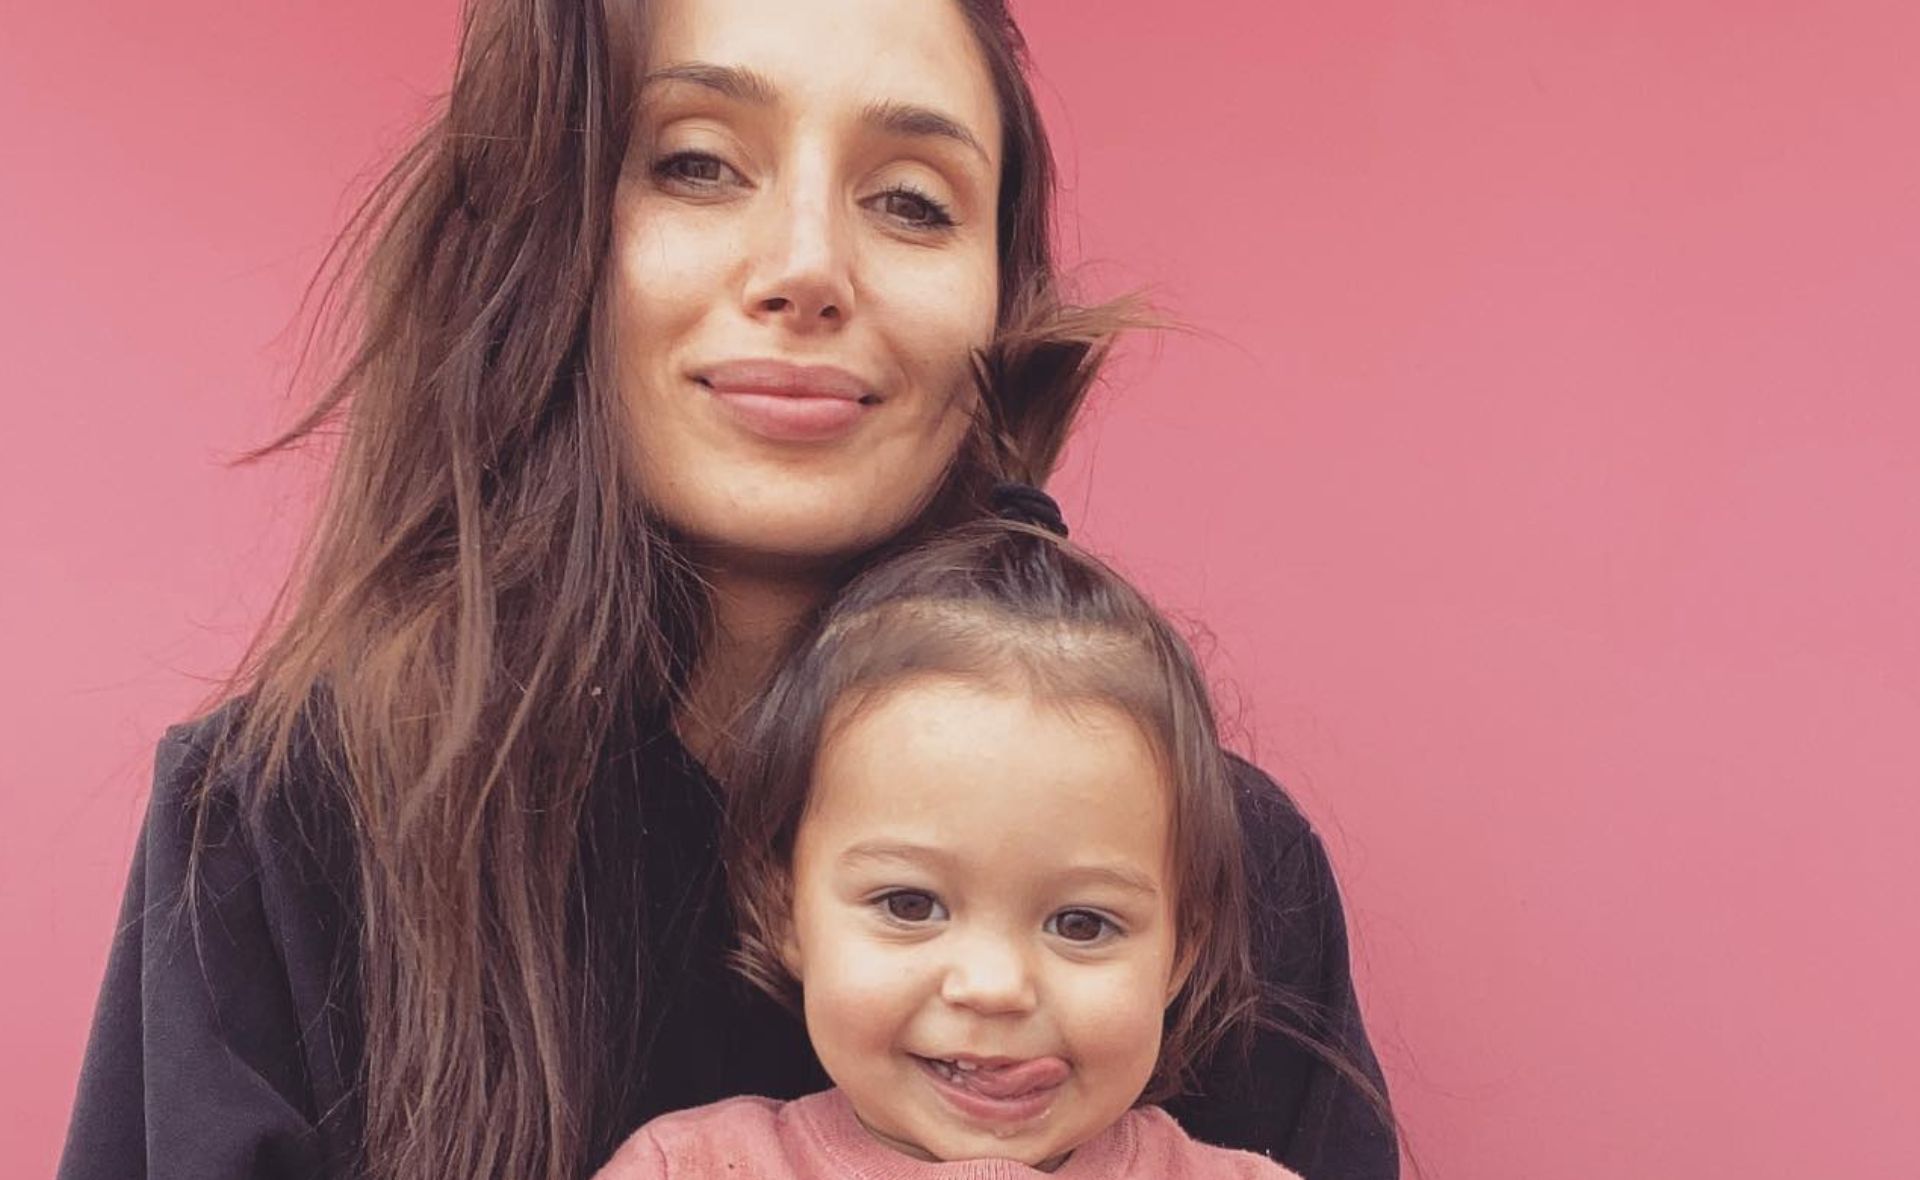 The adorable quality Snezana Wood’s daughter Charlie has inherited from her stylish mum